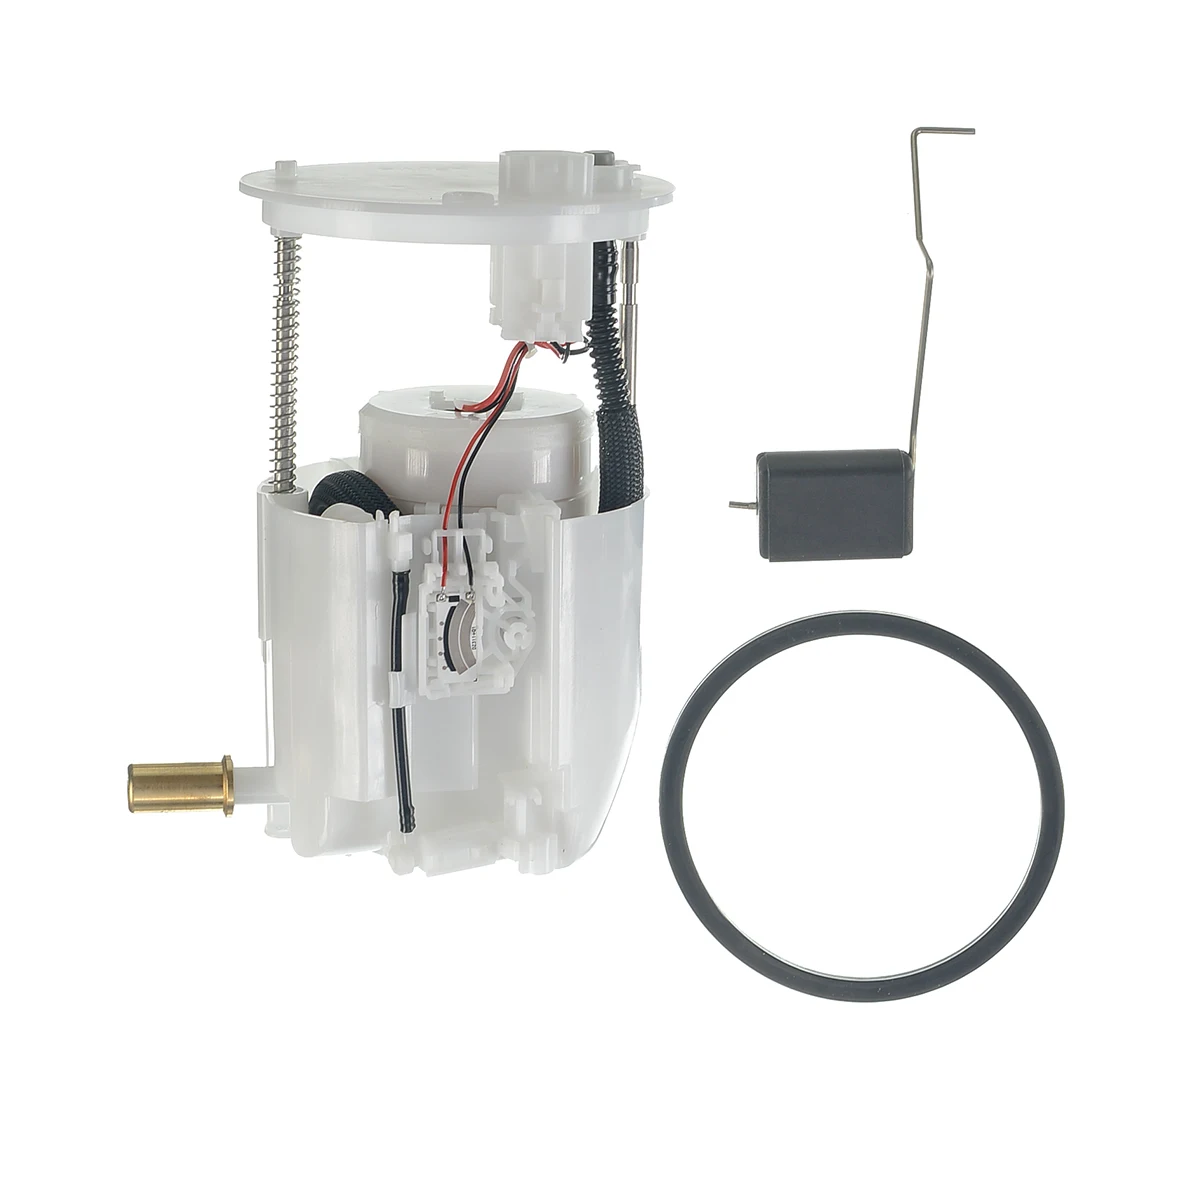 

In-stock CN US Electrical Fuel Pump Module Assembly for Toyota Venza V6 3.5L 2009-2015 SP8940M 770200T010